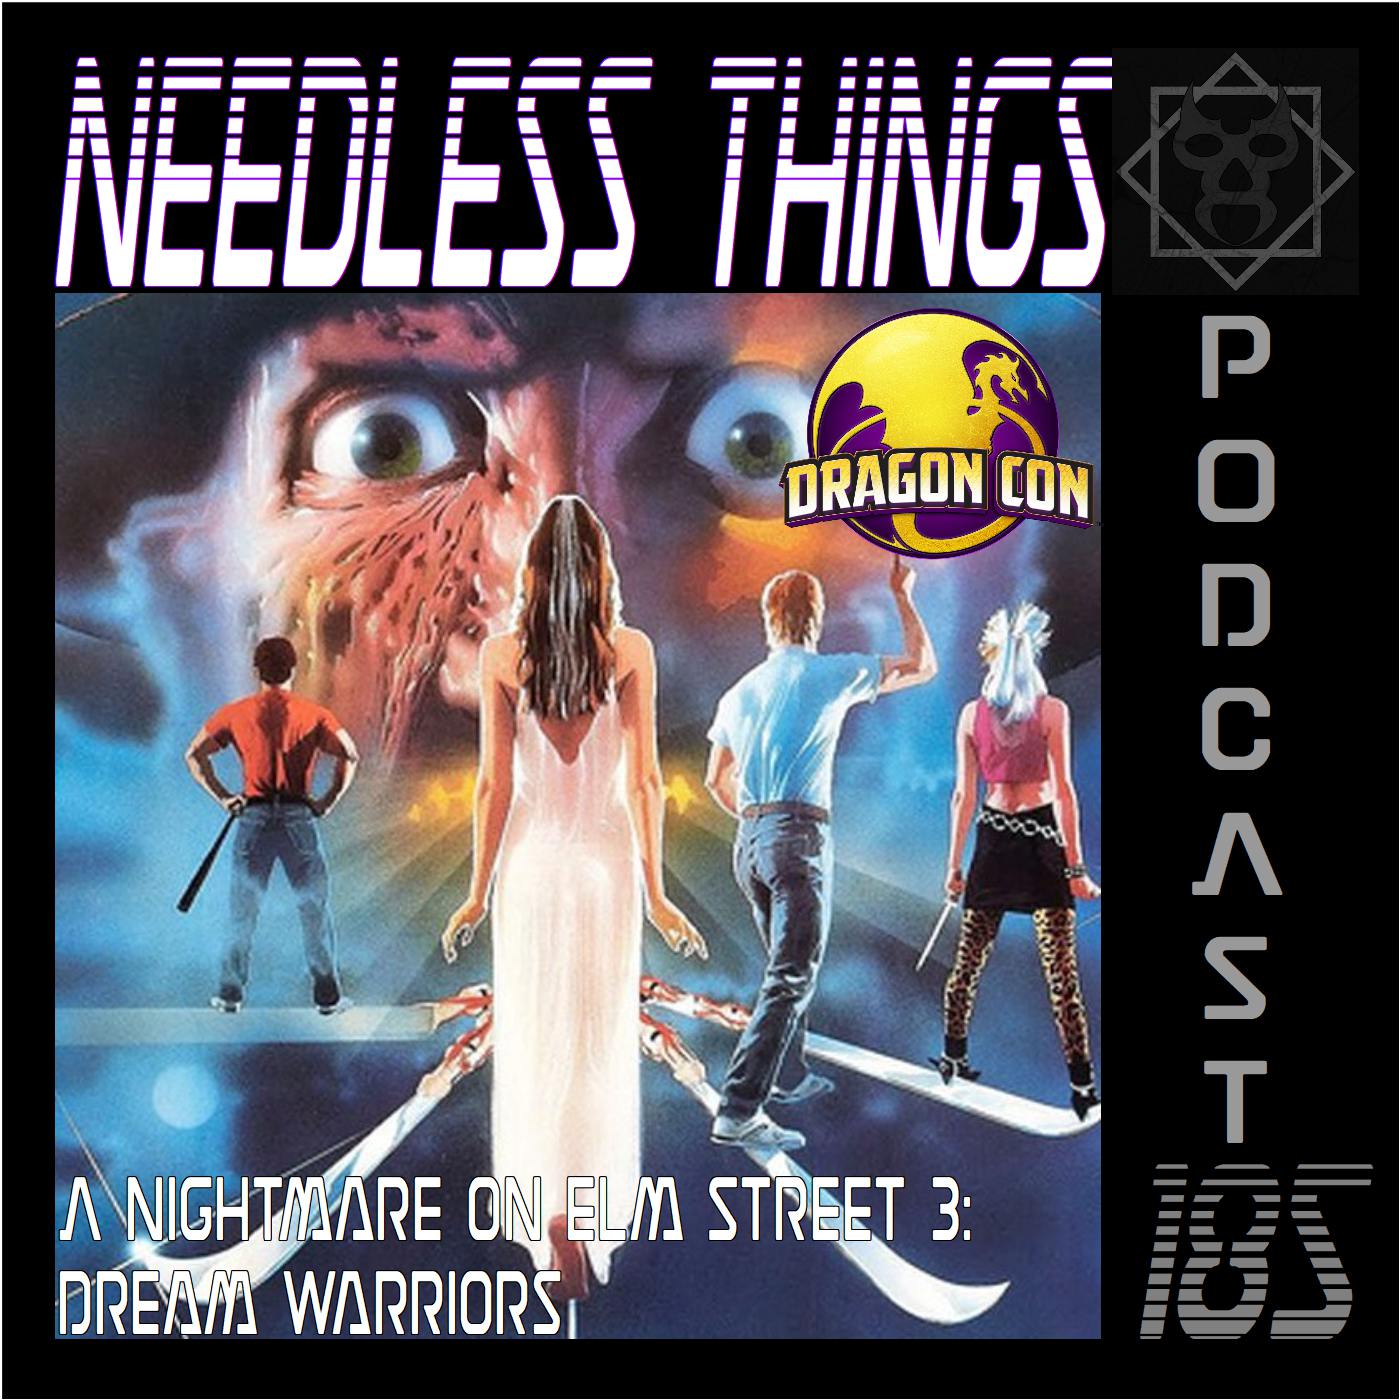 Needless Things Podcast 185 – A Nightmare on Elm Street 3: Dream Warriors